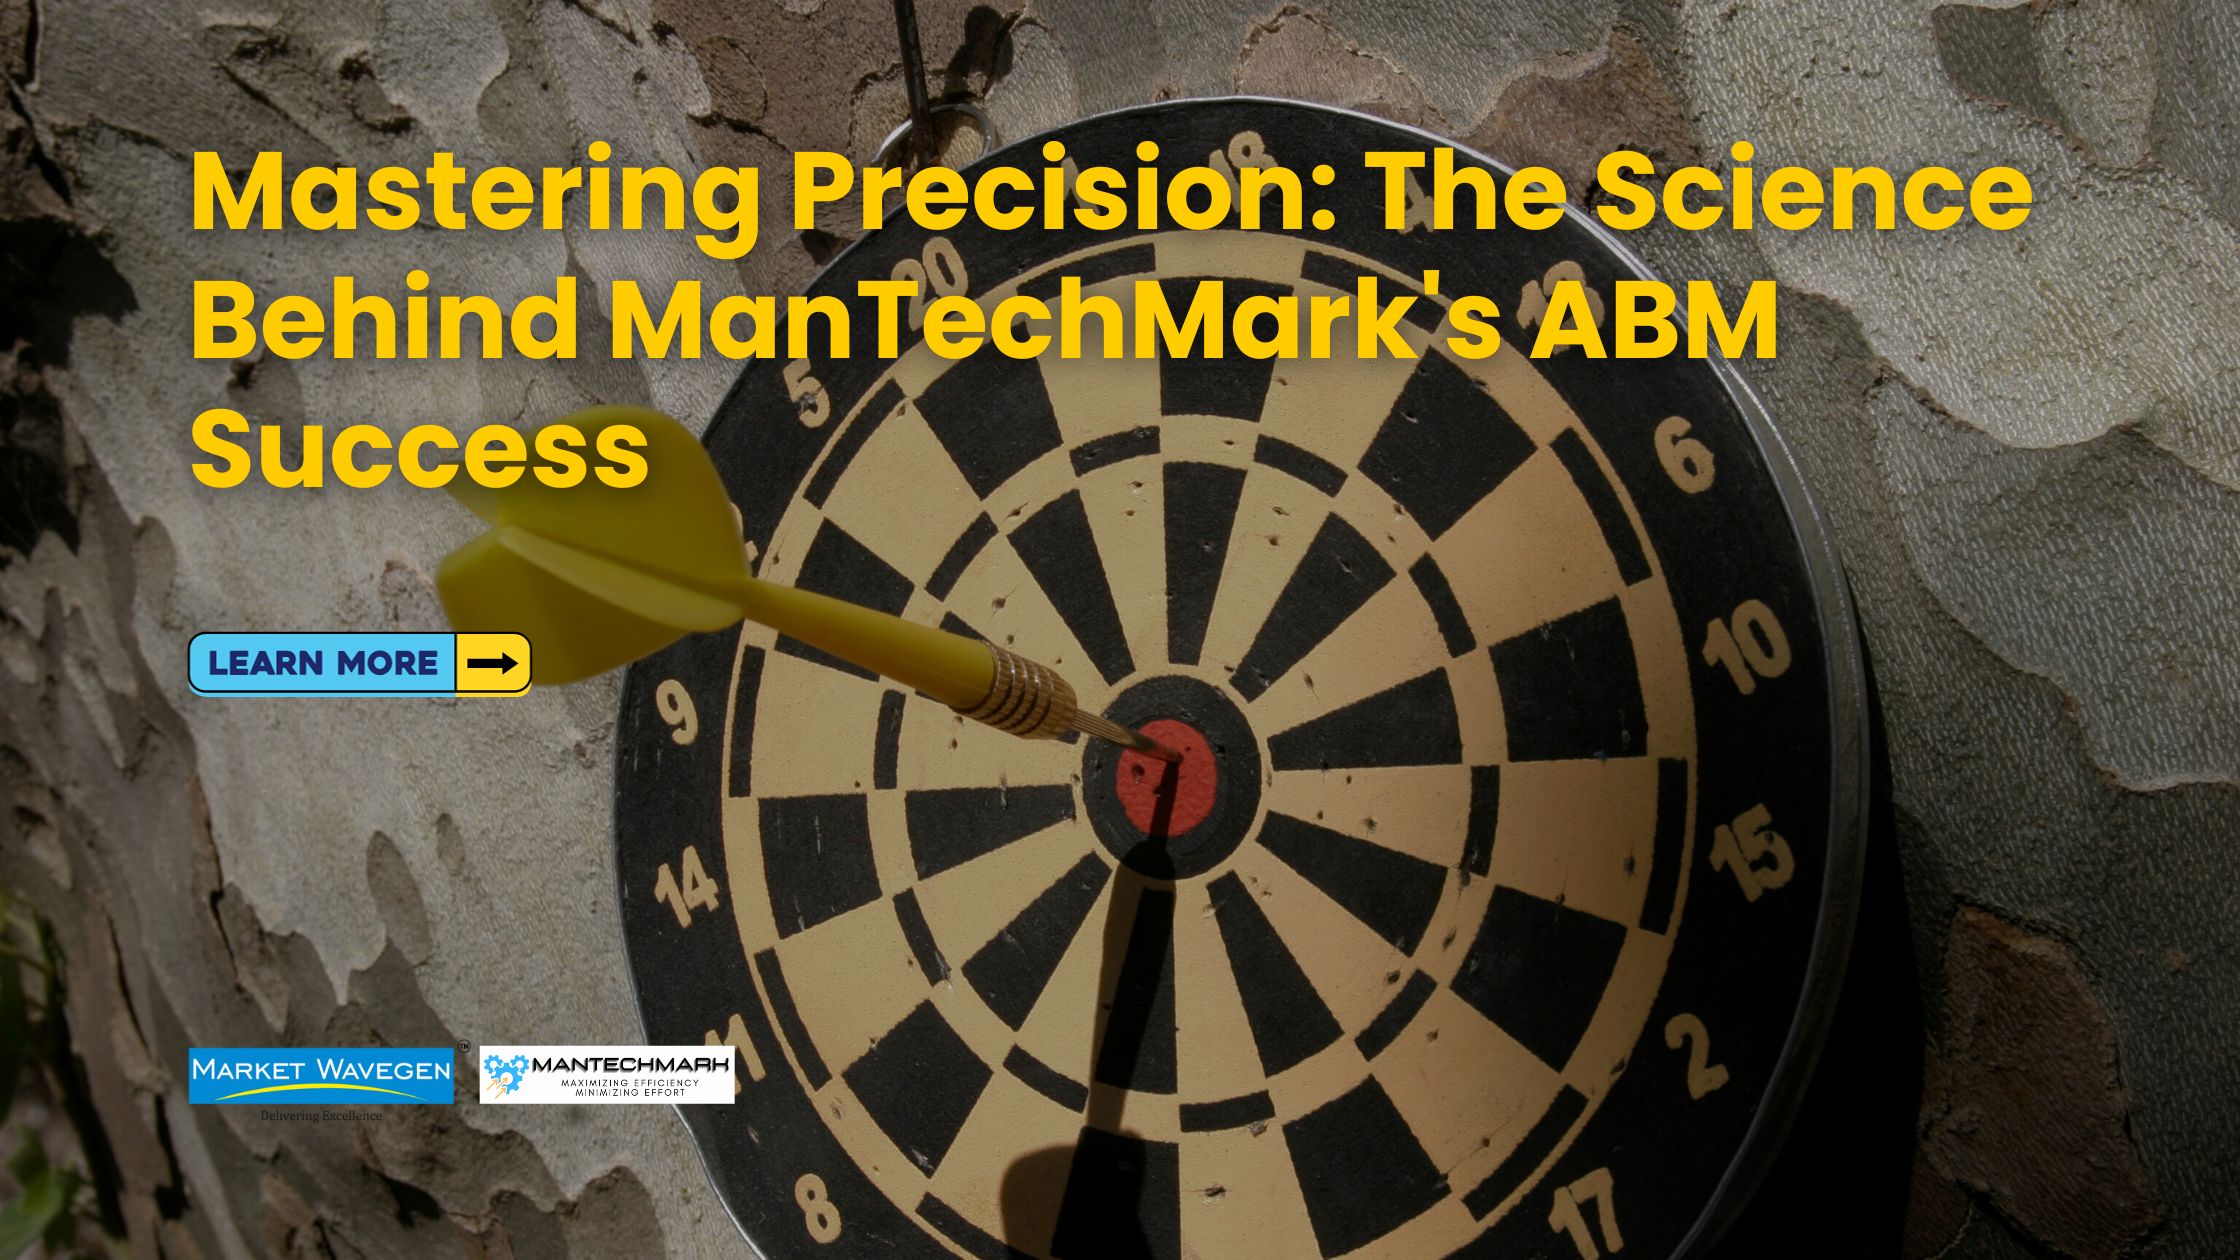 Science Behind ManTechMark's ABM Success market wavegen market wavegen 2024 precison marketing in 2024 abm in 2024 SIRS